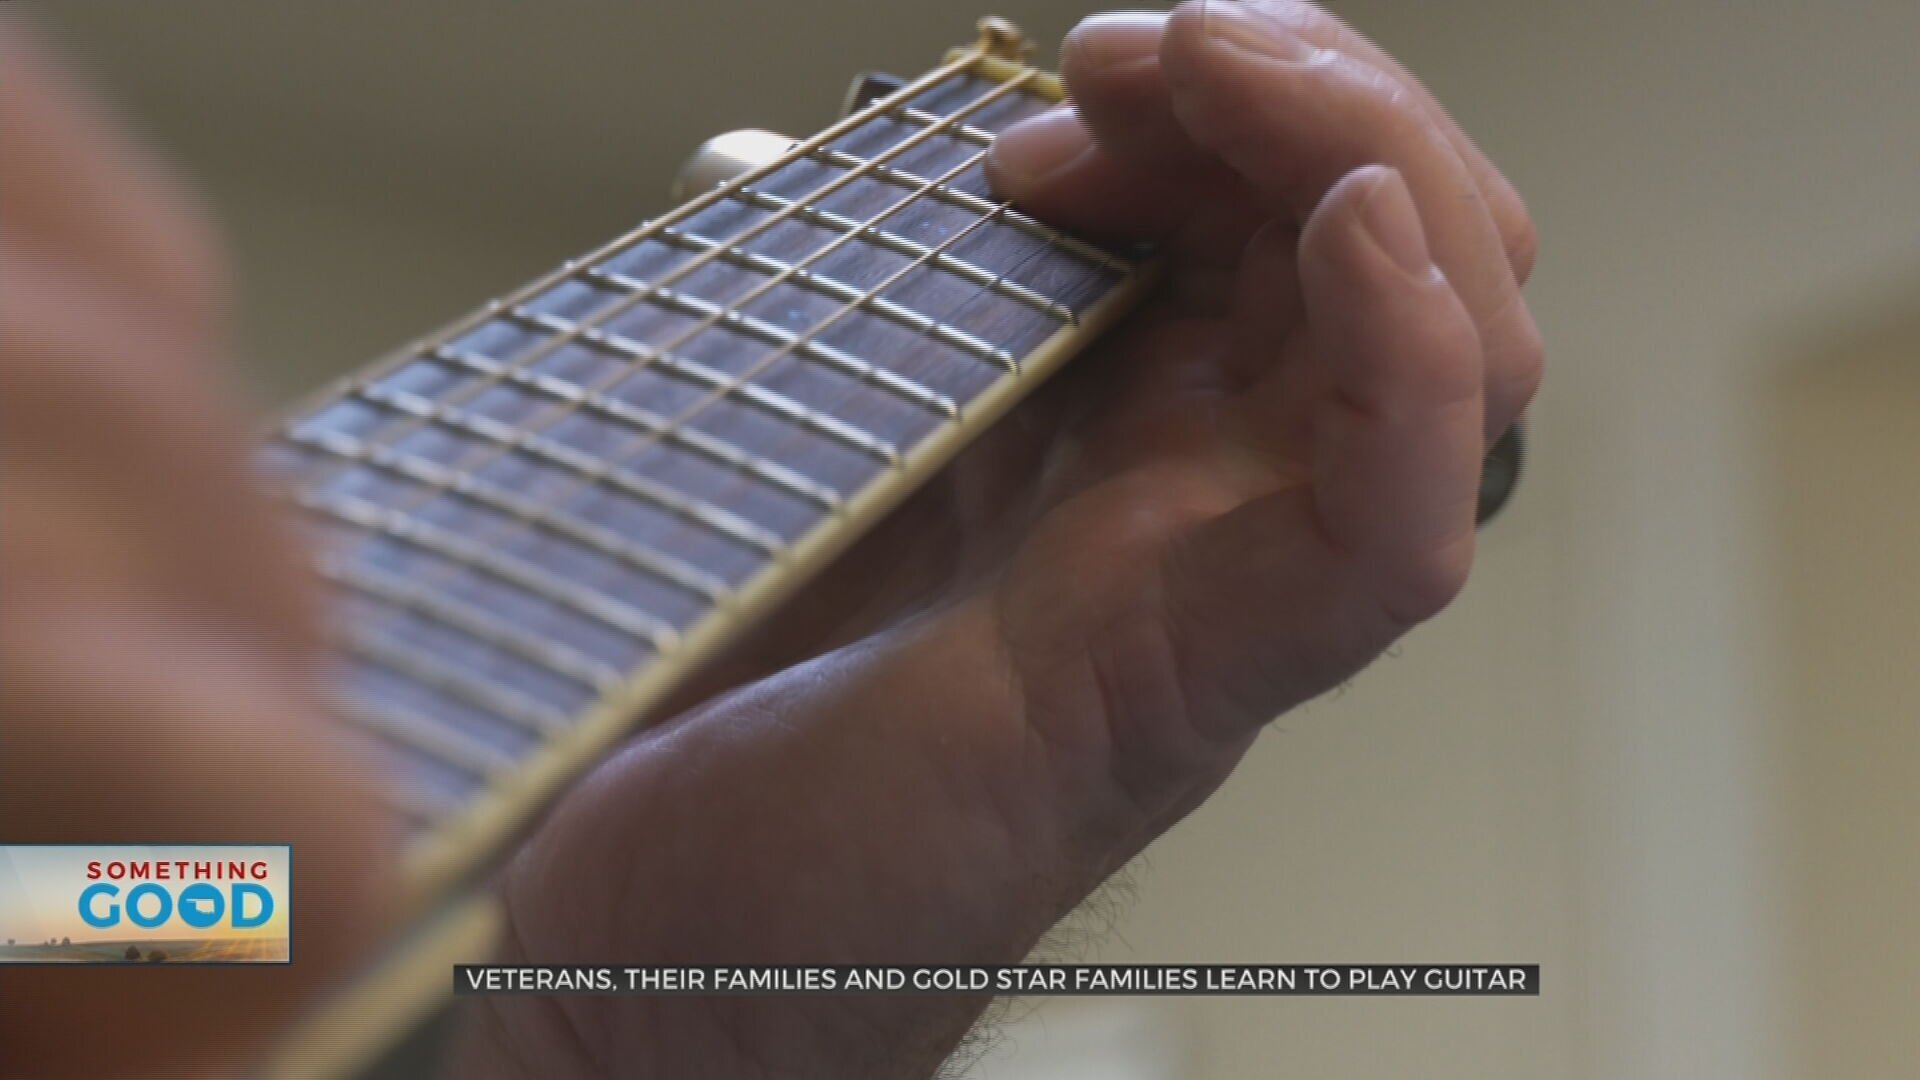 Veterans & Their Families Find Harmony In Opportunity To Make Music Together